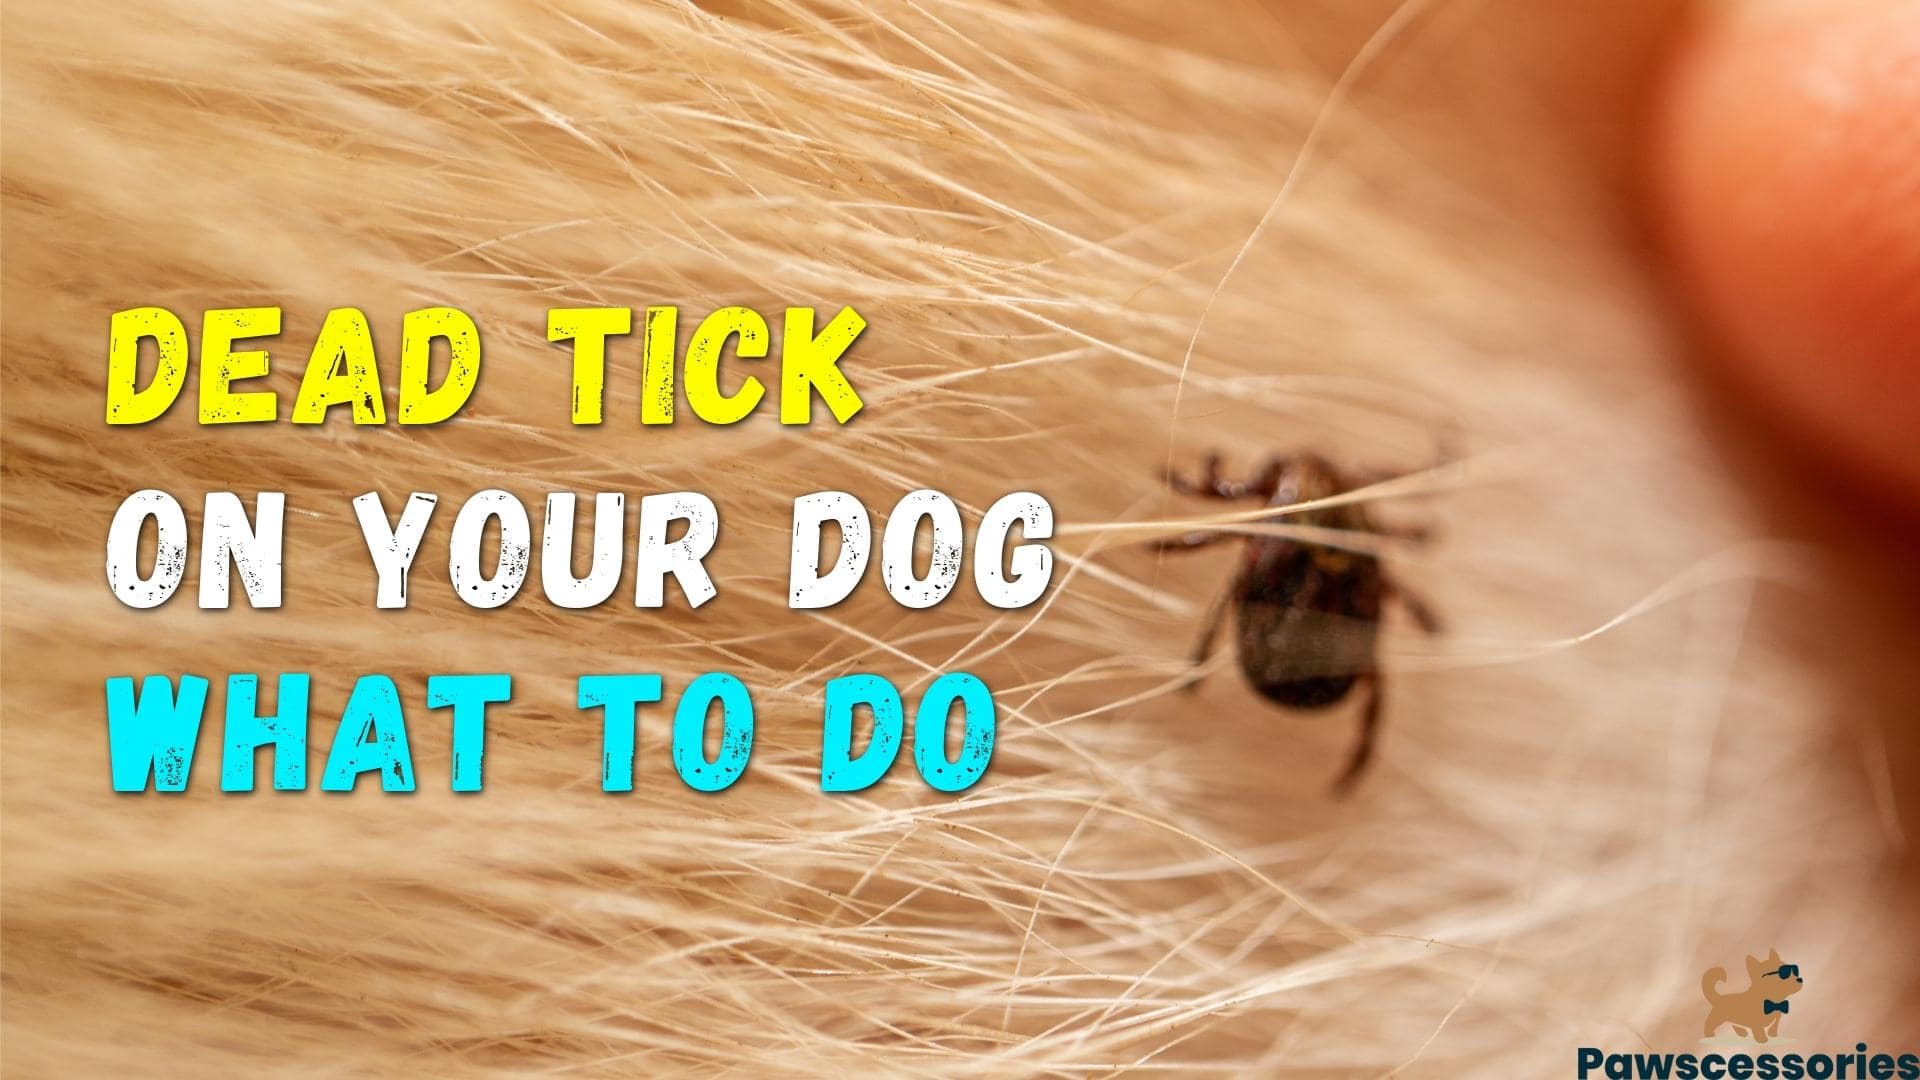 Dried Dead Tick On Dog? What You Need To Do (Vet Answers)